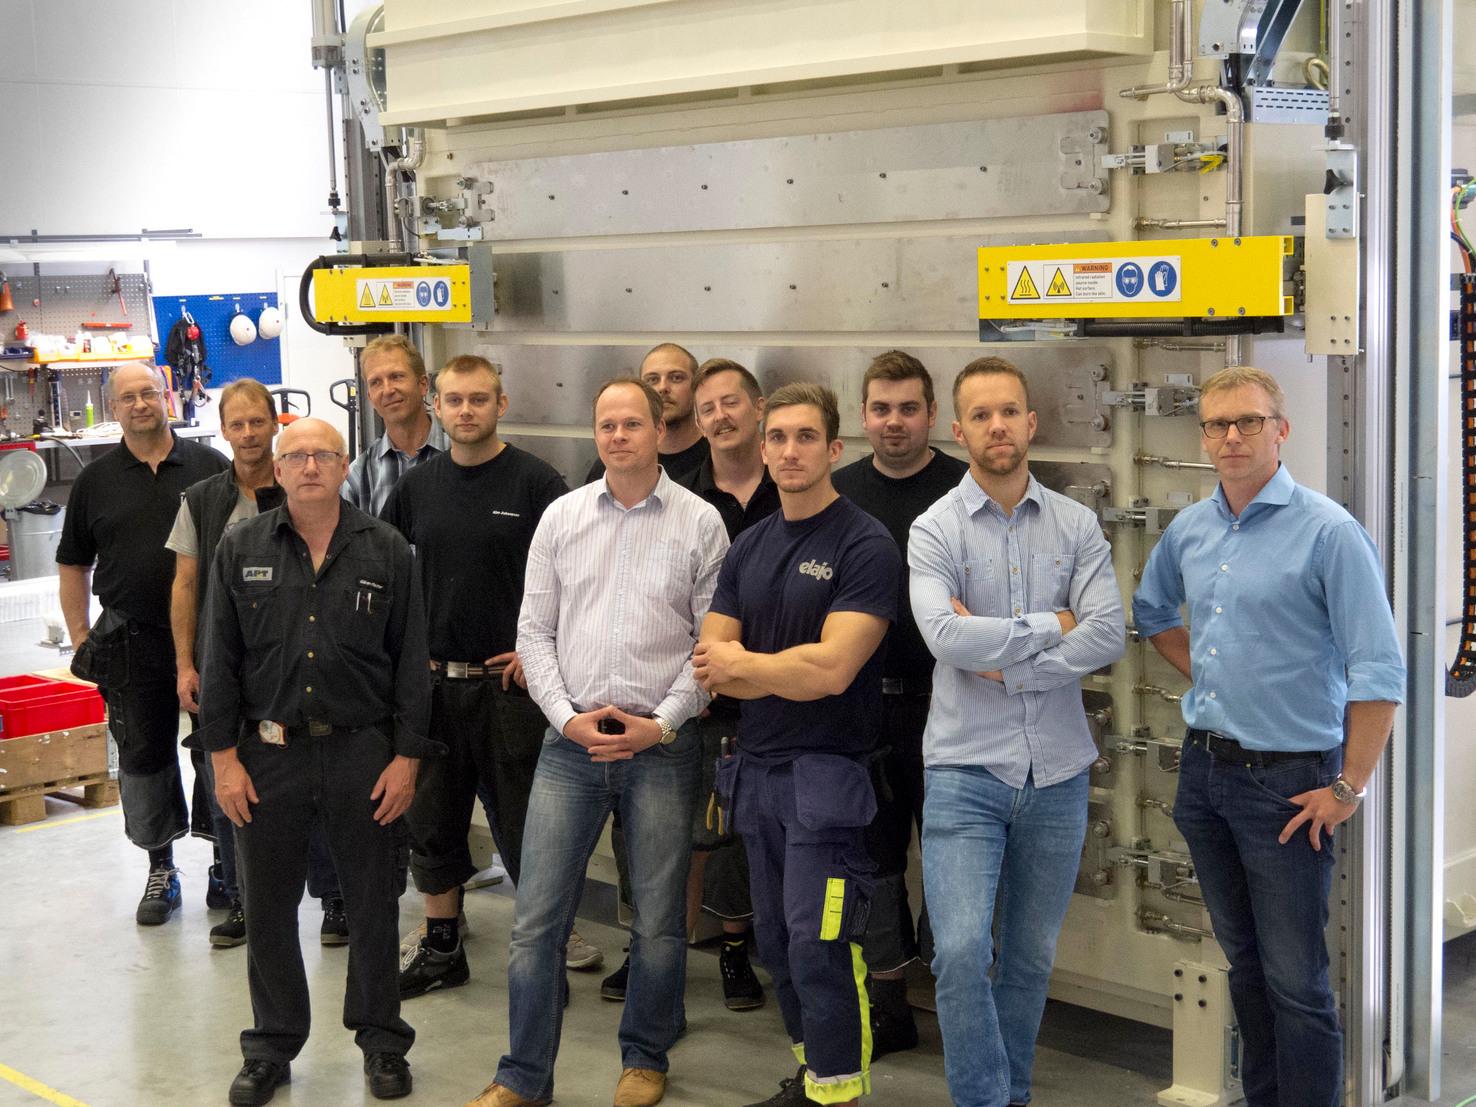 The development team in Ulricehamn, Sweden gathered in front of the new generation of MLF before the global launch.